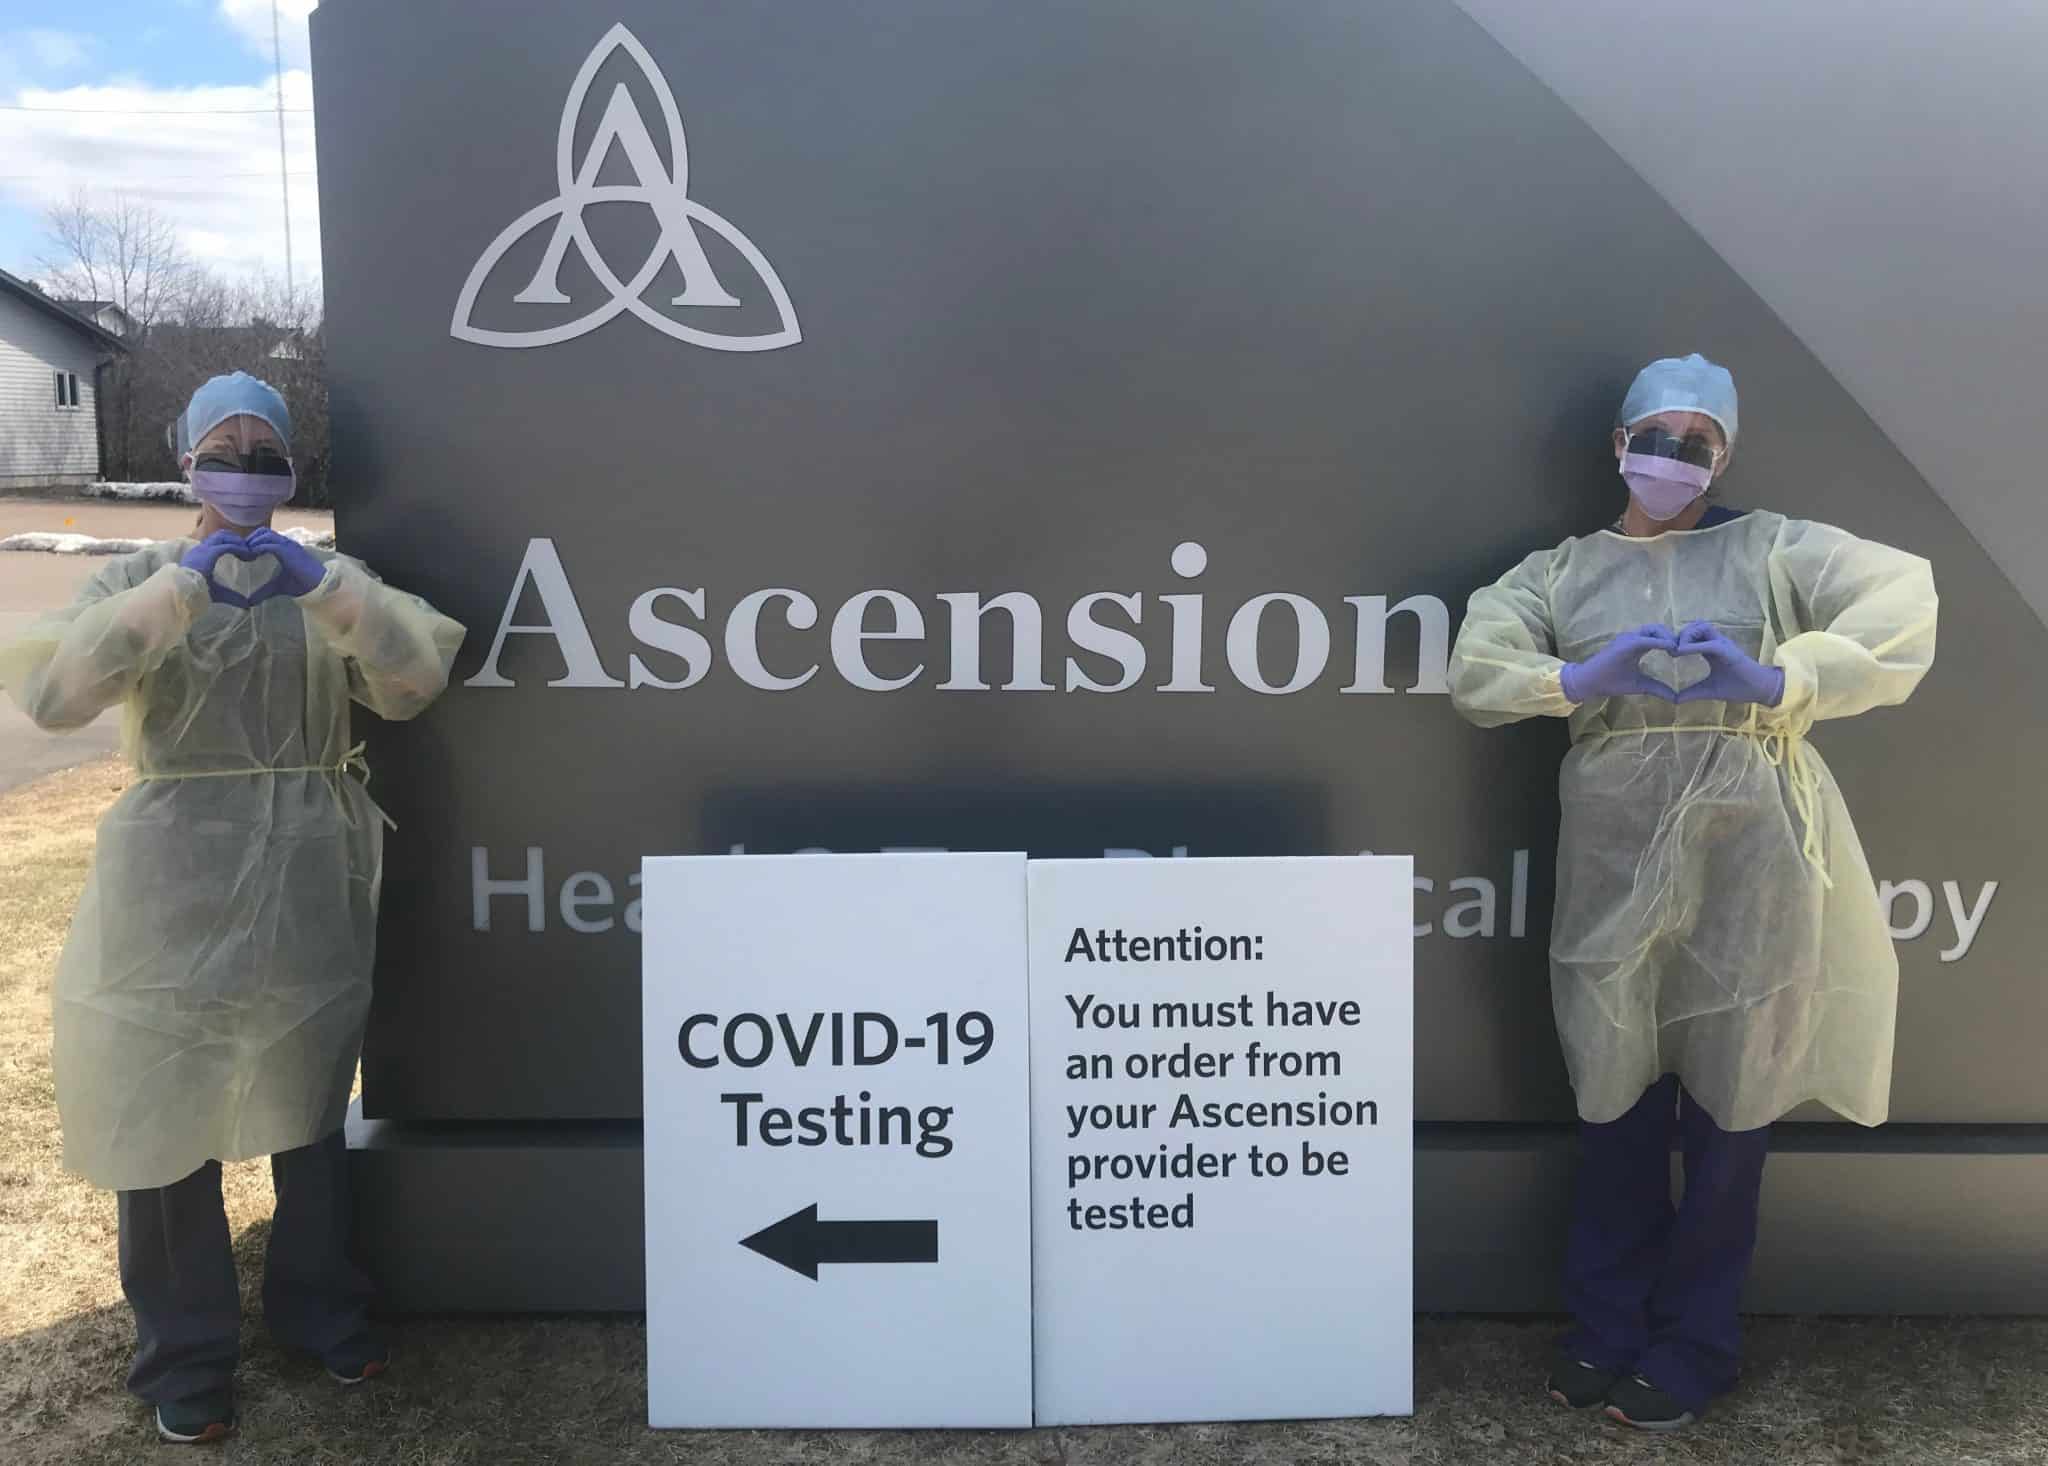 Ascension Medical Group offering COVID-19 drive-through testing in Tomahawk